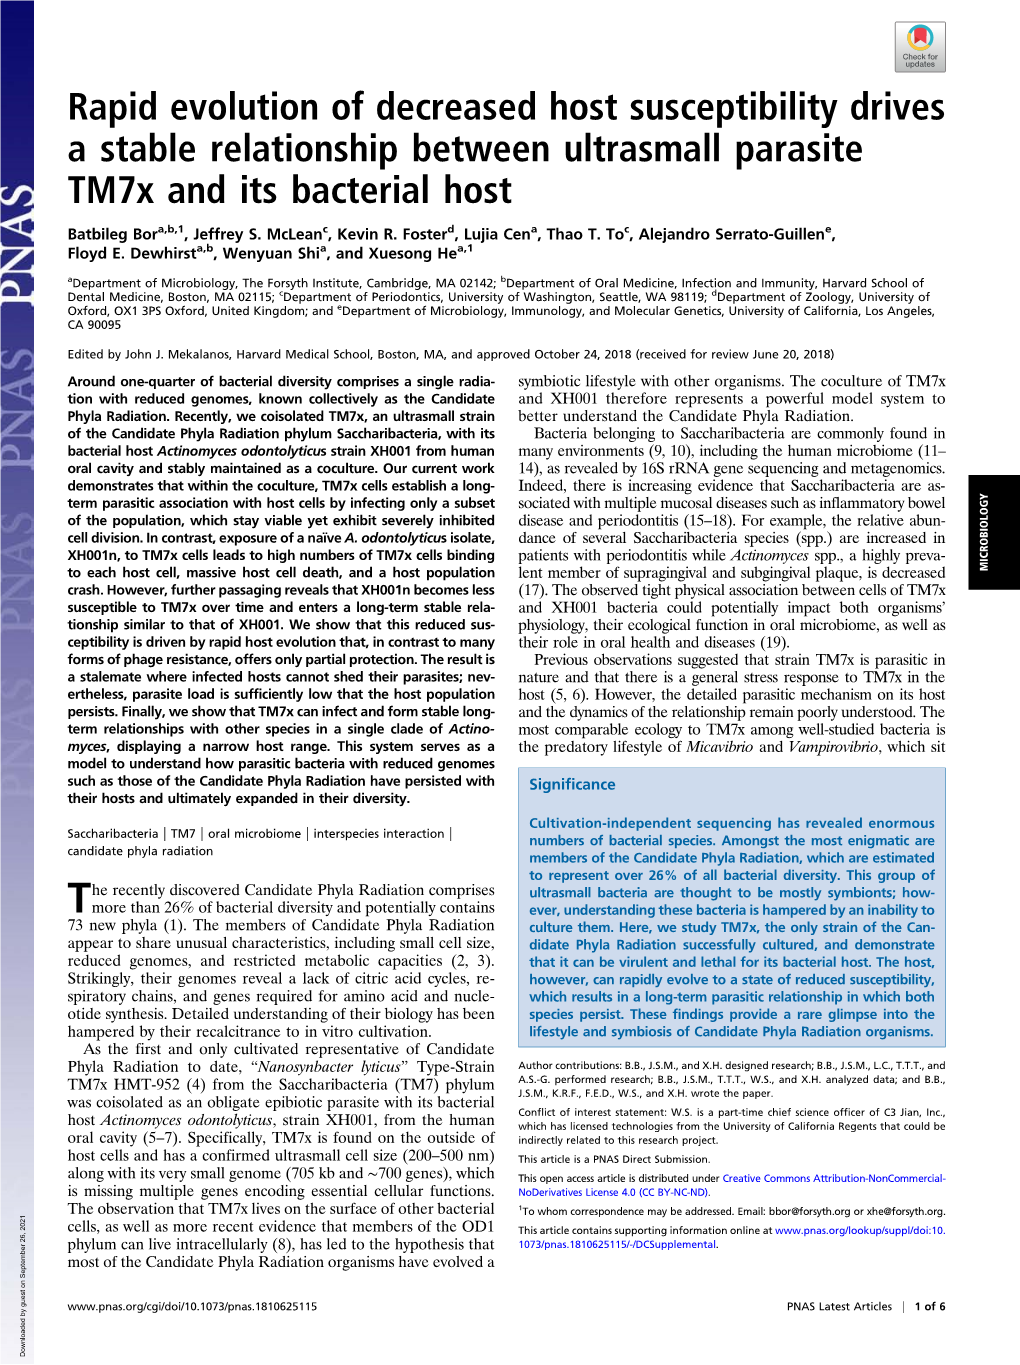 Rapid Evolution of Decreased Host Susceptibility Drives a Stable Relationship Between Ultrasmall Parasite Tm7x and Its Bacterial Host